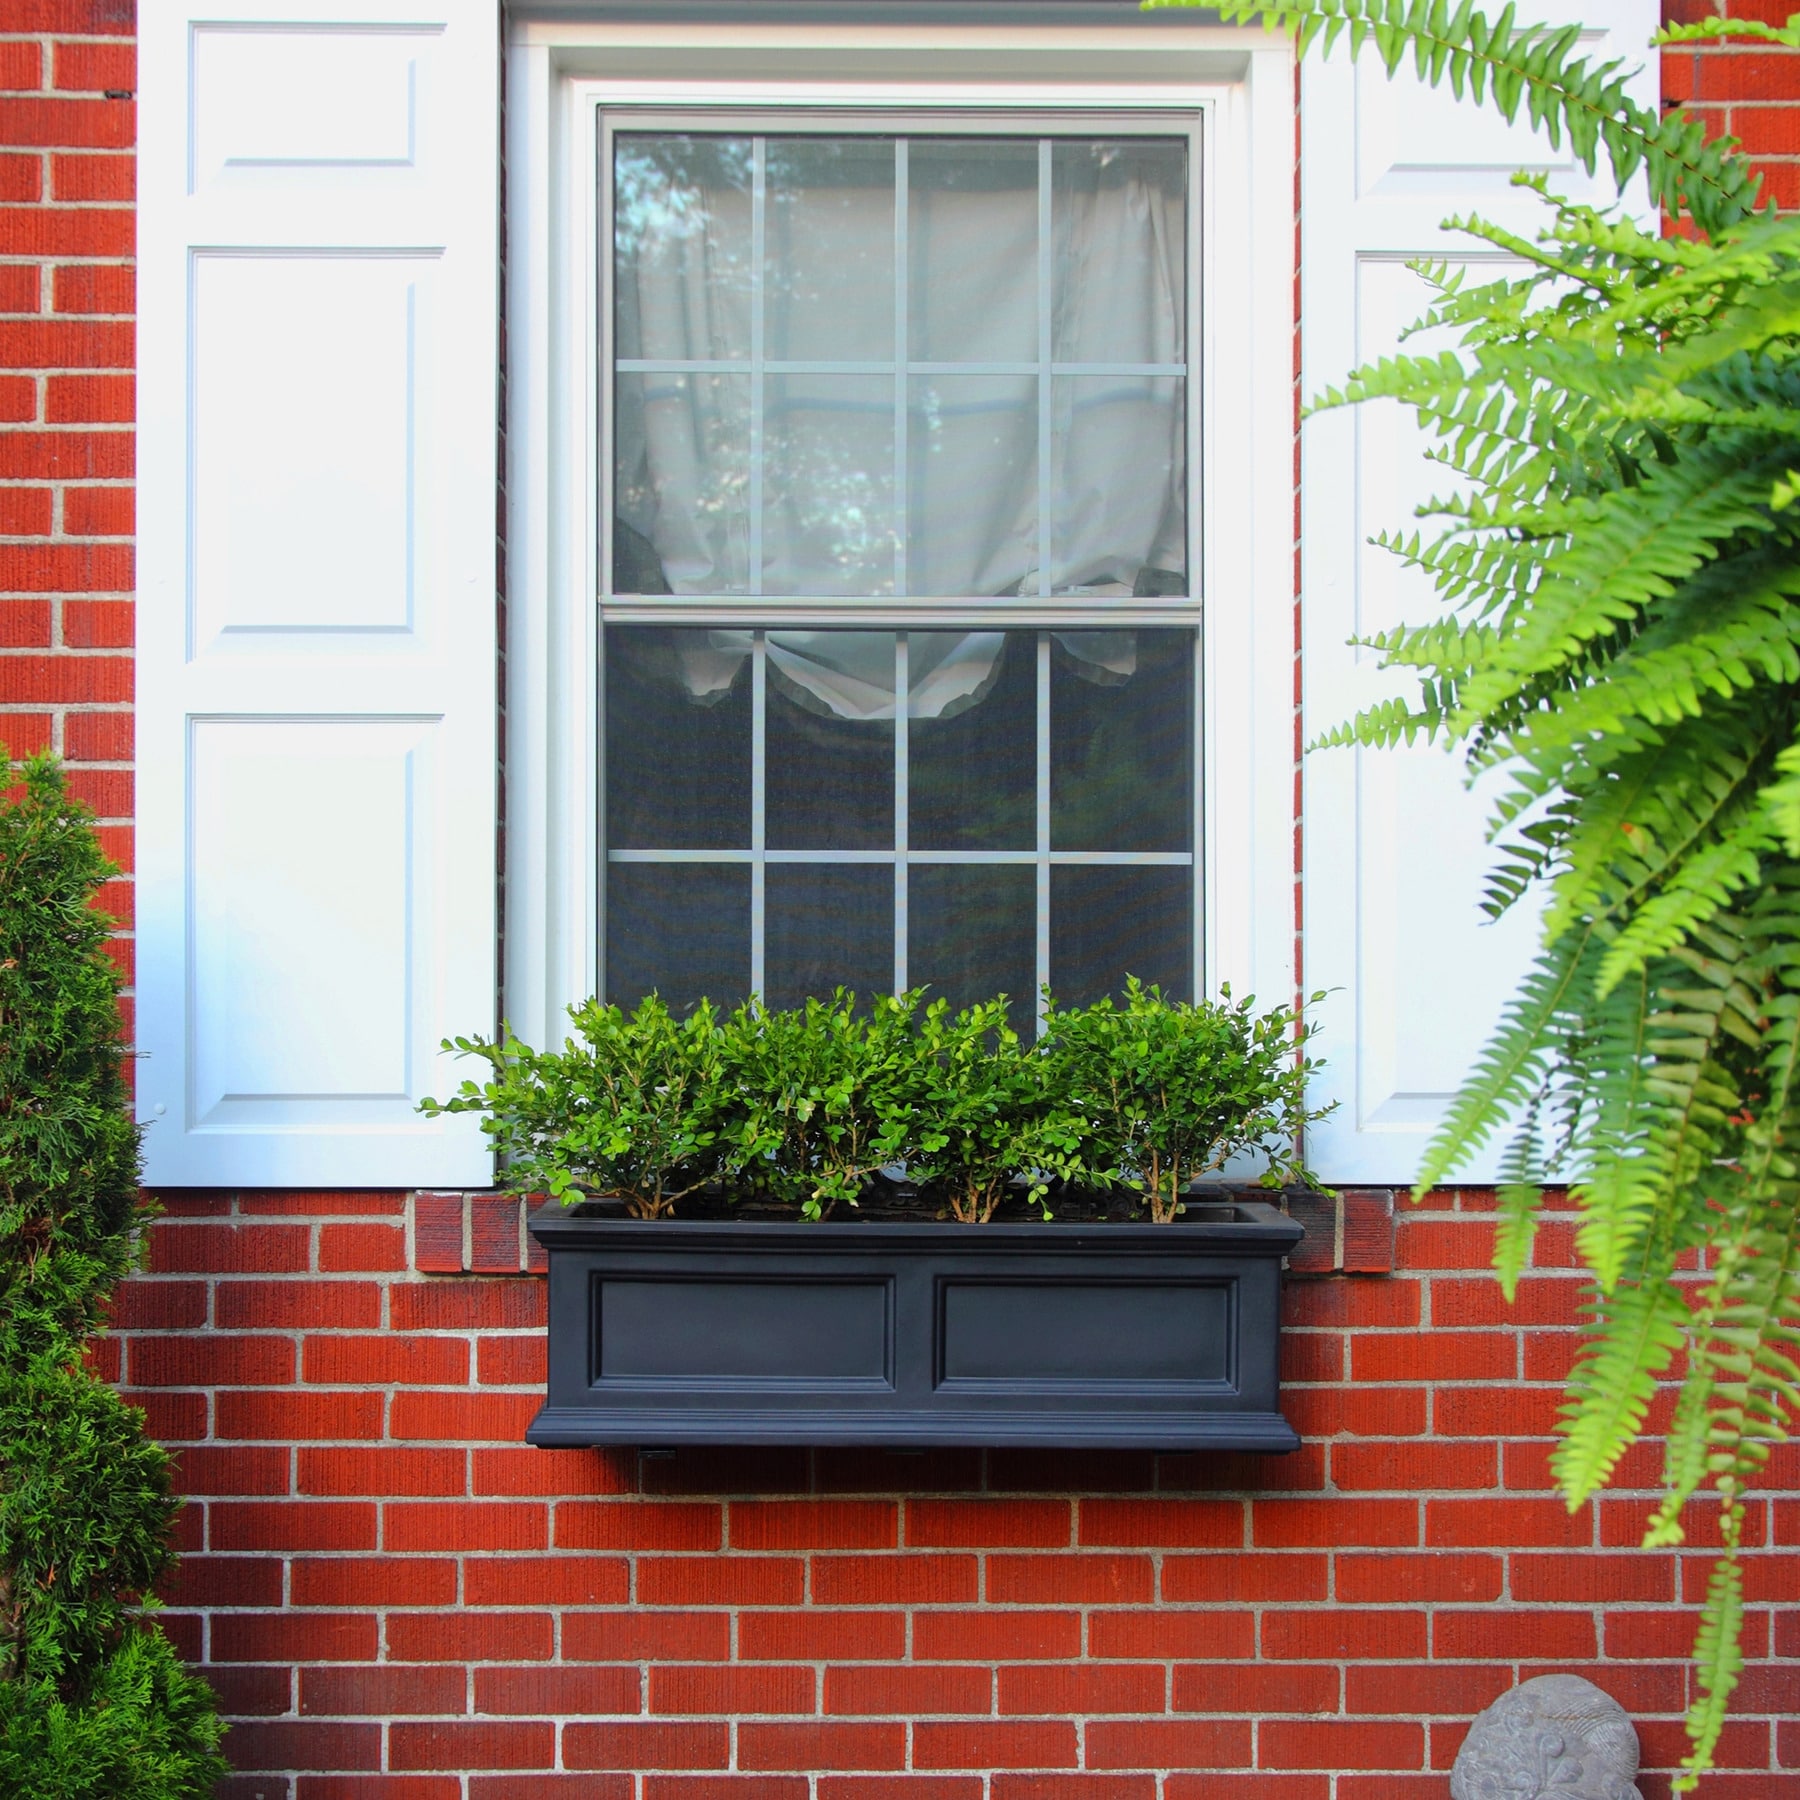 Mayne 36-in W x 10.8-in H Black Resin Traditional Outdoor Window Box